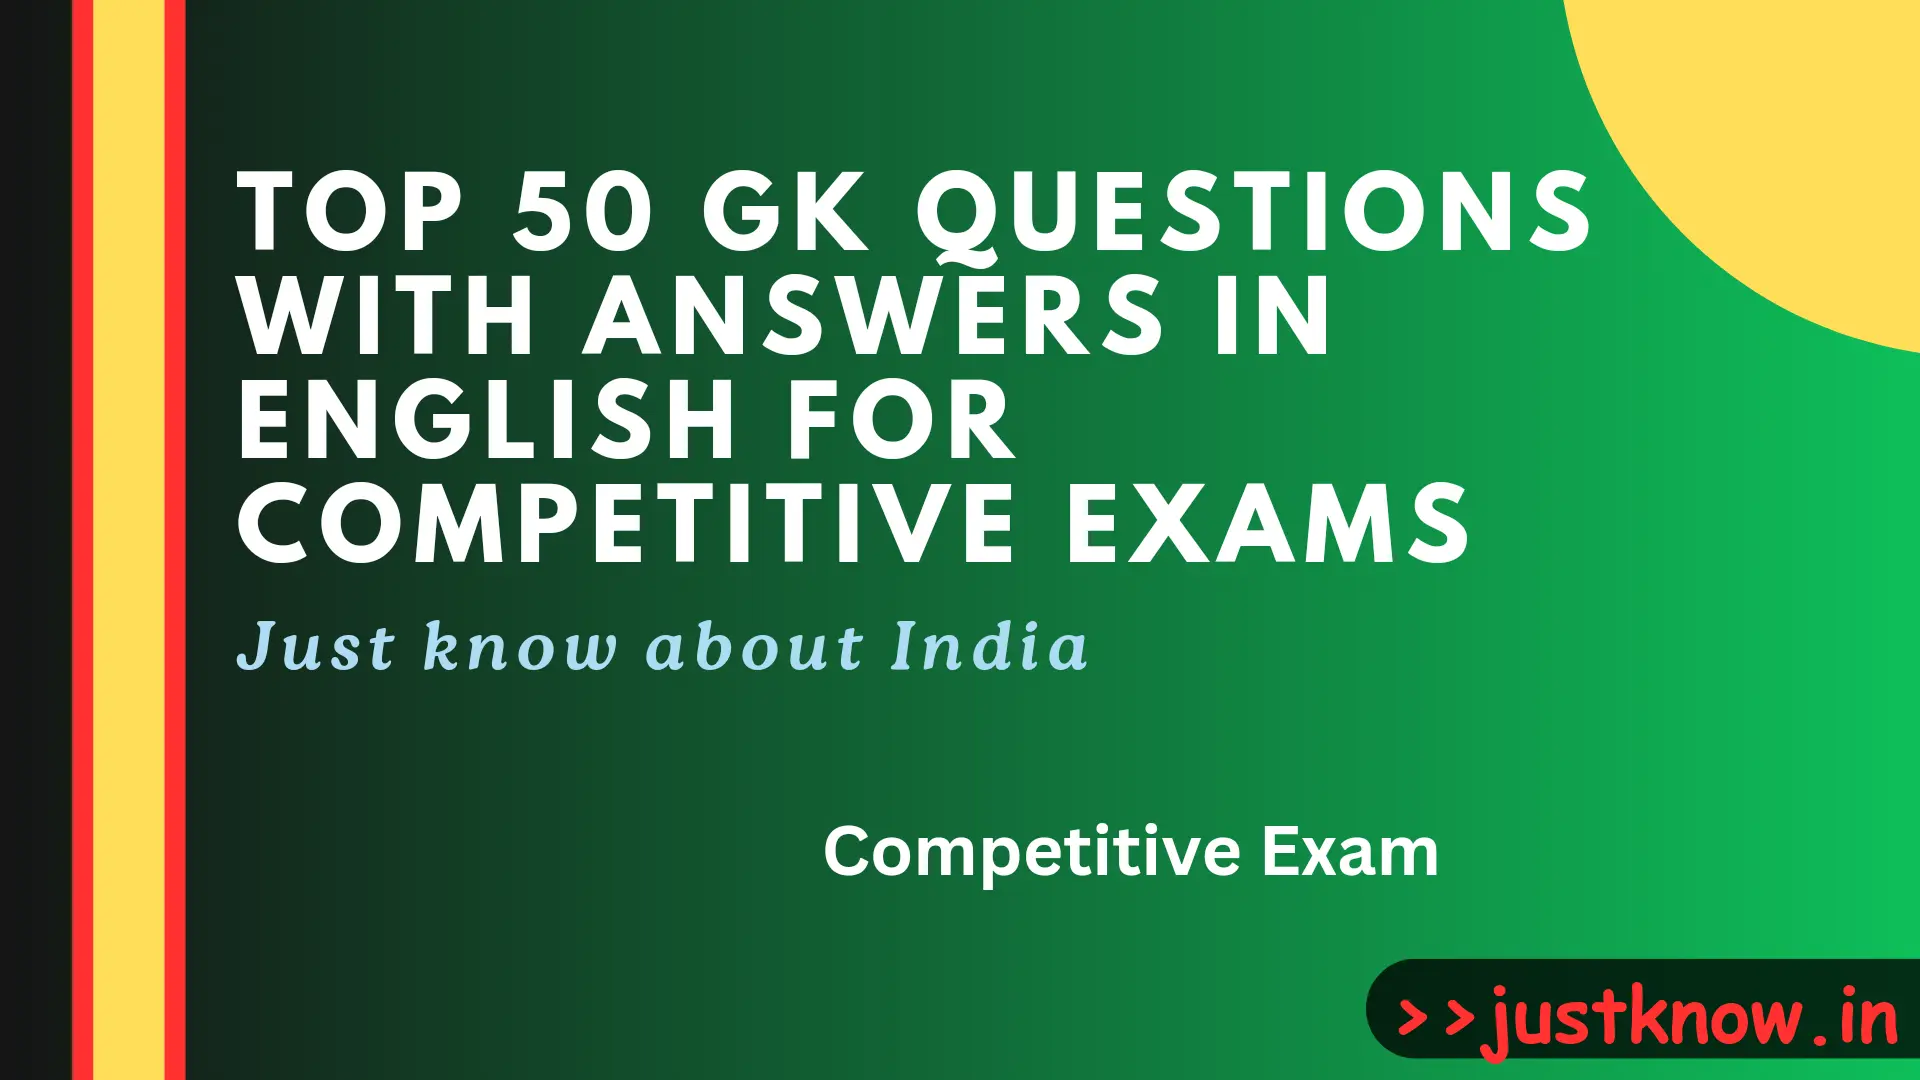 Top 50 GK Questions With Answers in English